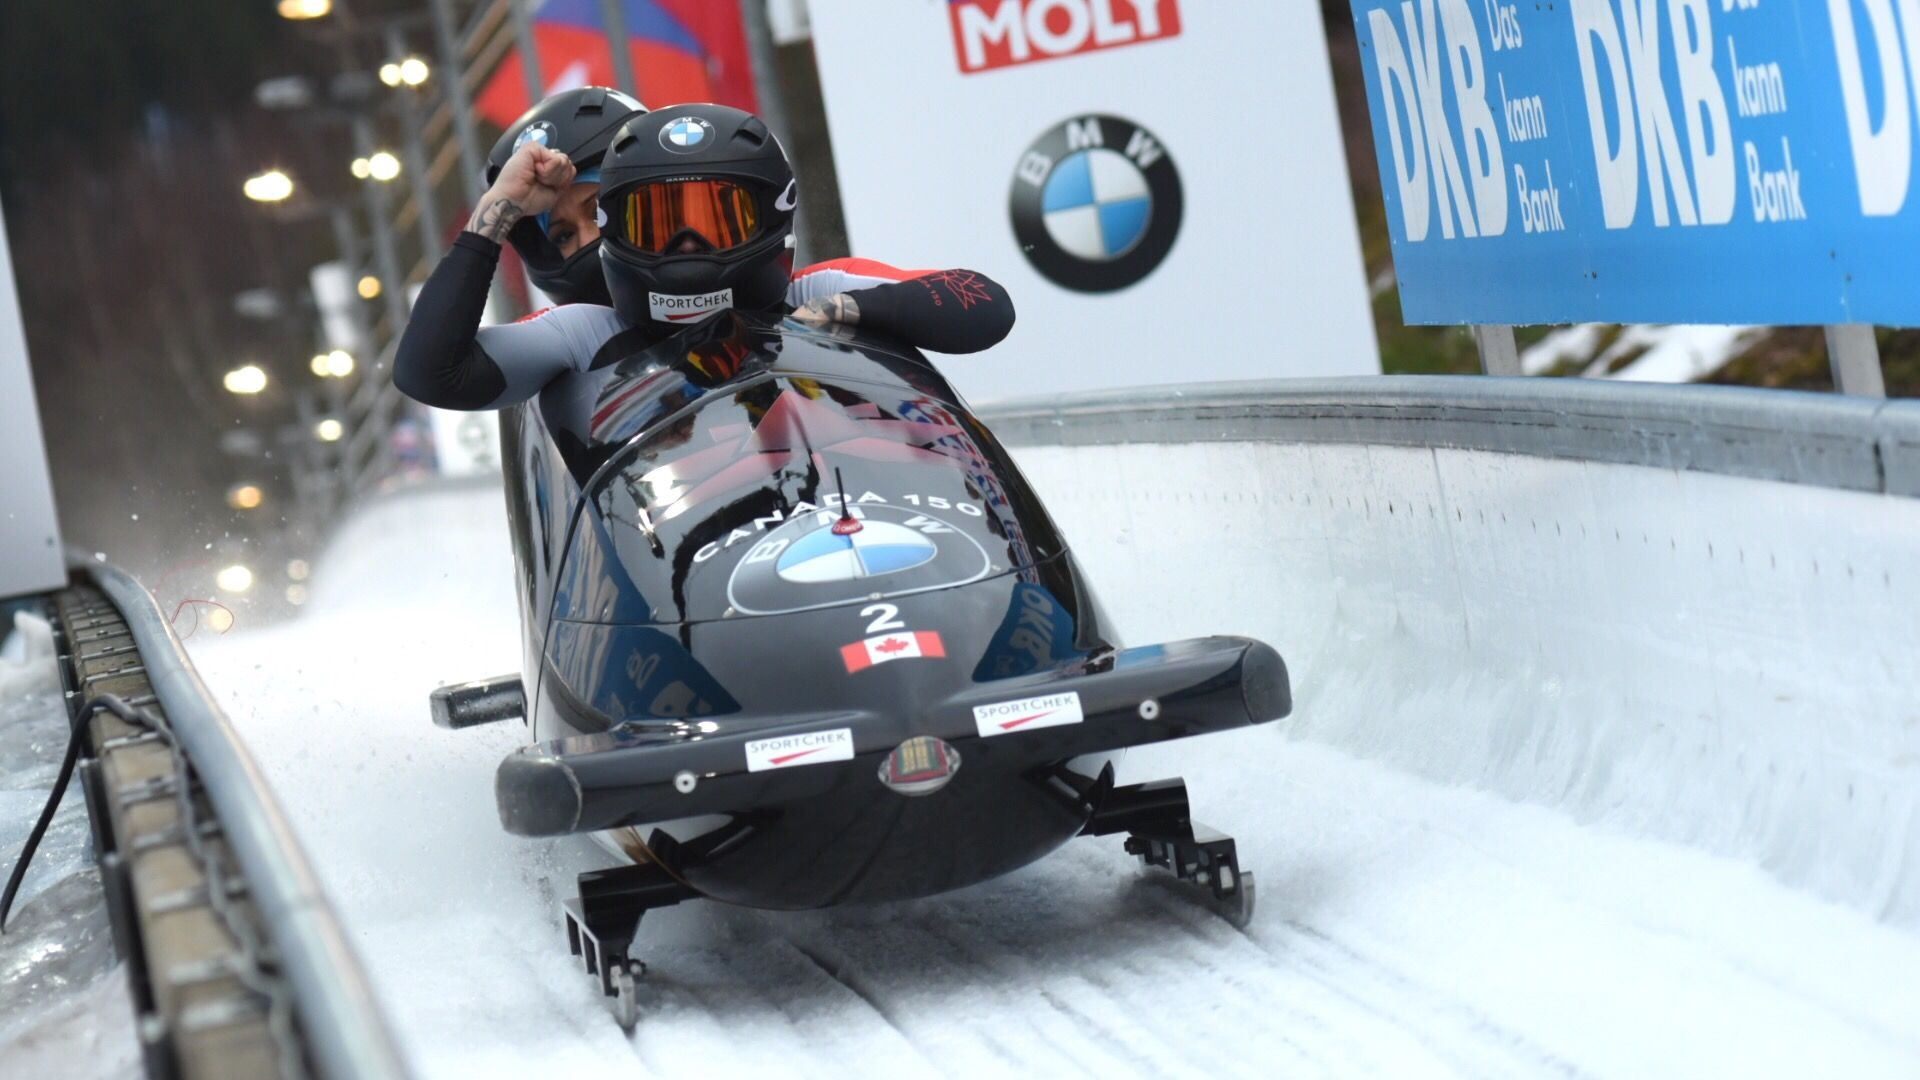 Kaillie Humphries and Phylicia George claimed a Canadian victory ©IBSF